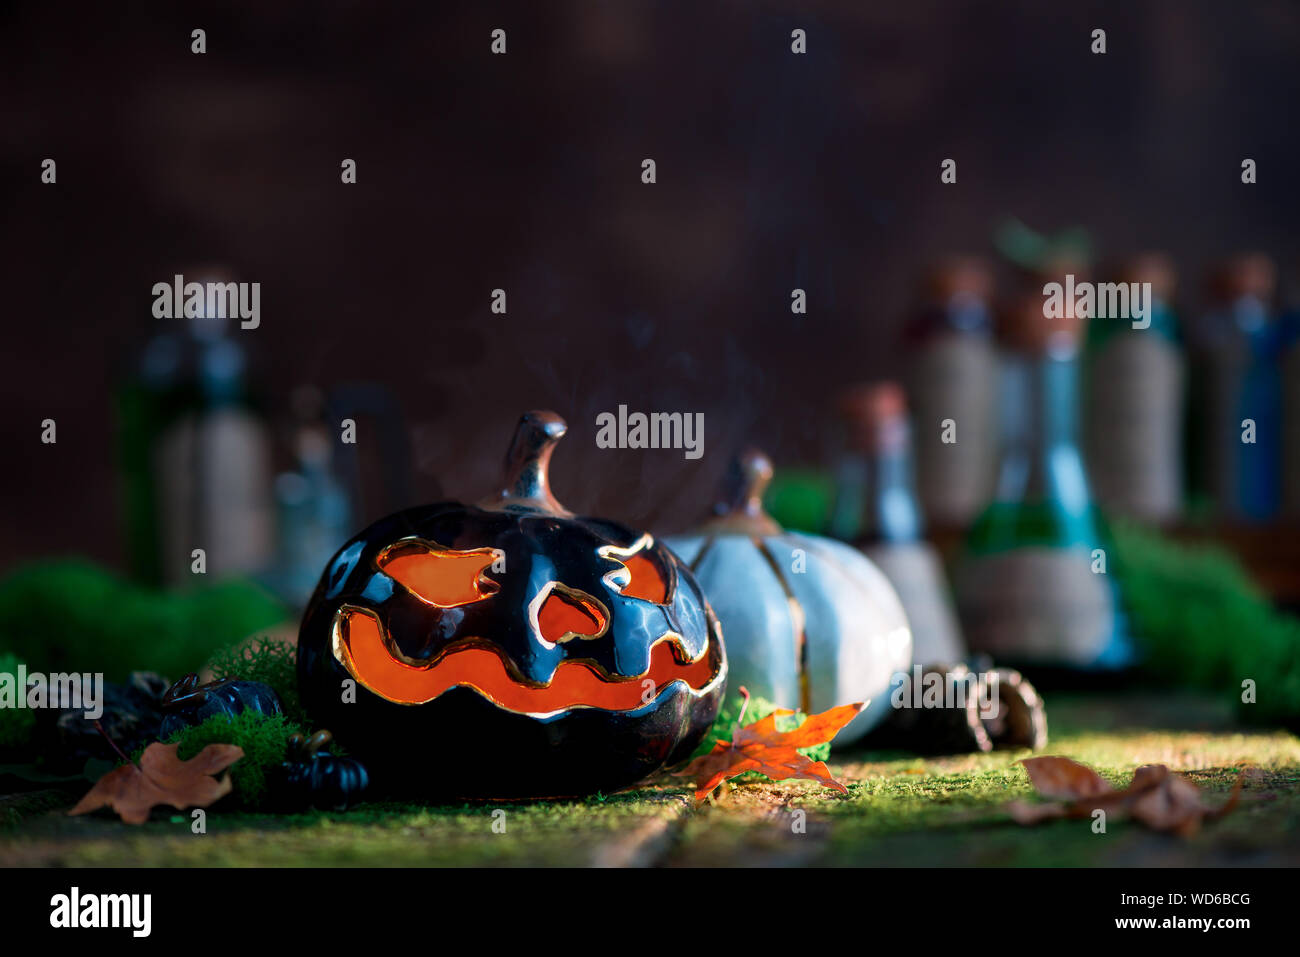 Ceramic pumpkin with glowing eyes on a background with moss and fallen leaves with copy space. Halloween still life Stock Photo